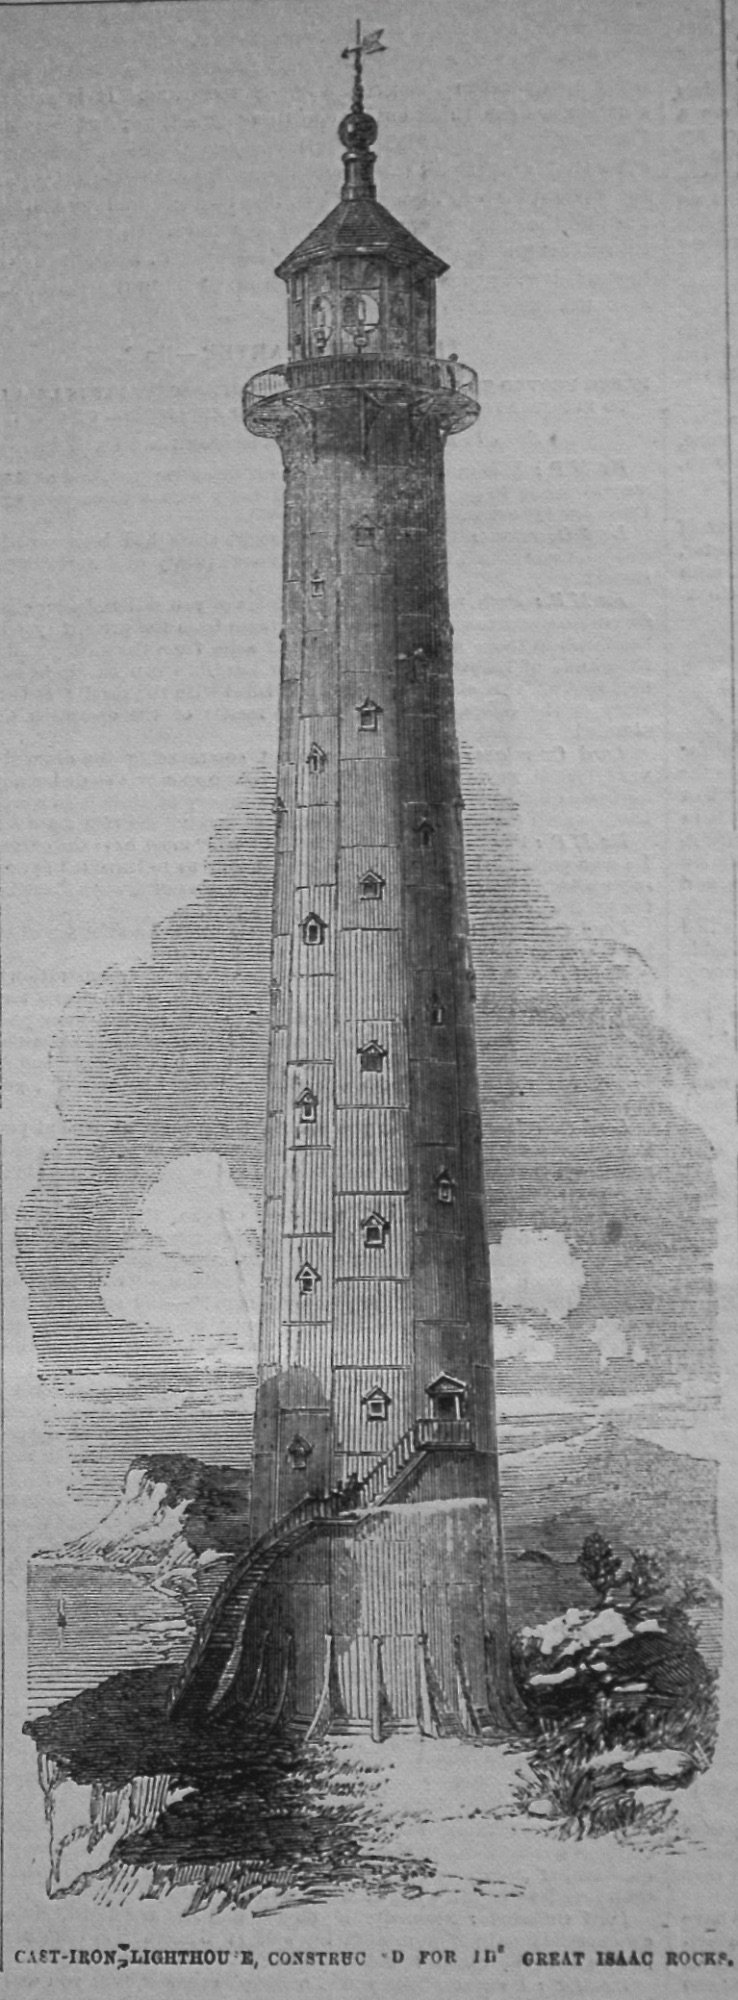 Cast Iron Lighthouse, Constructed for in, Great Isaac Rocks. 1855